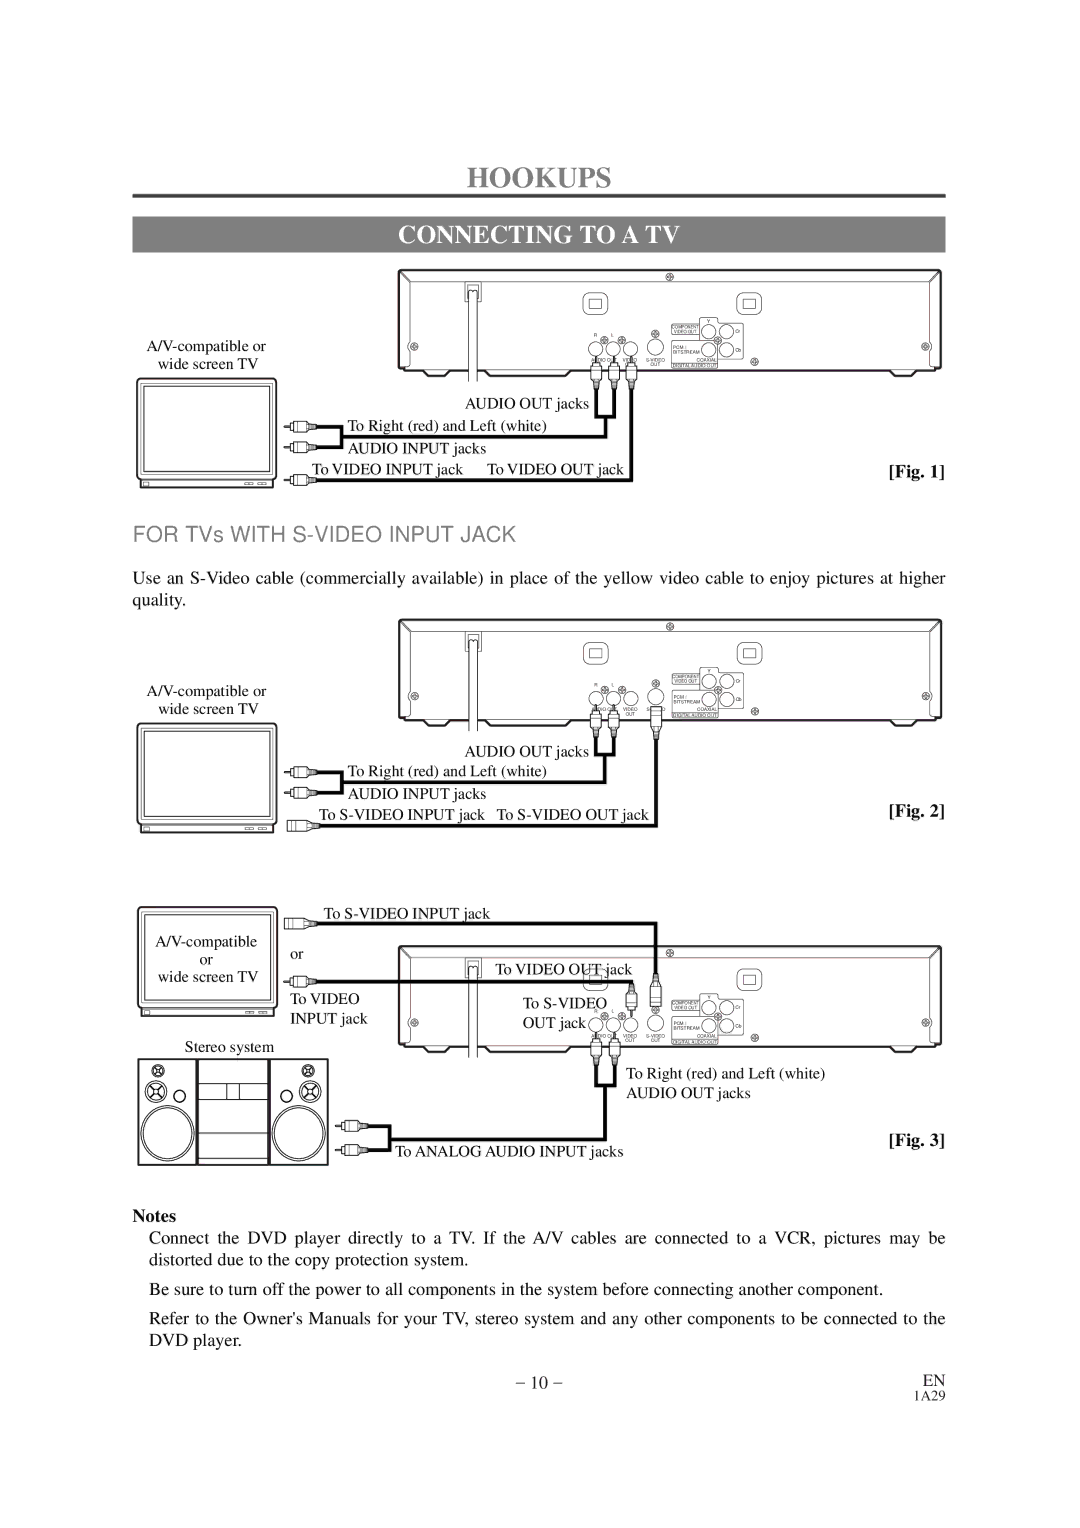 Sylvania DVL100CB owner manual Hookups, Connecting to a TV 